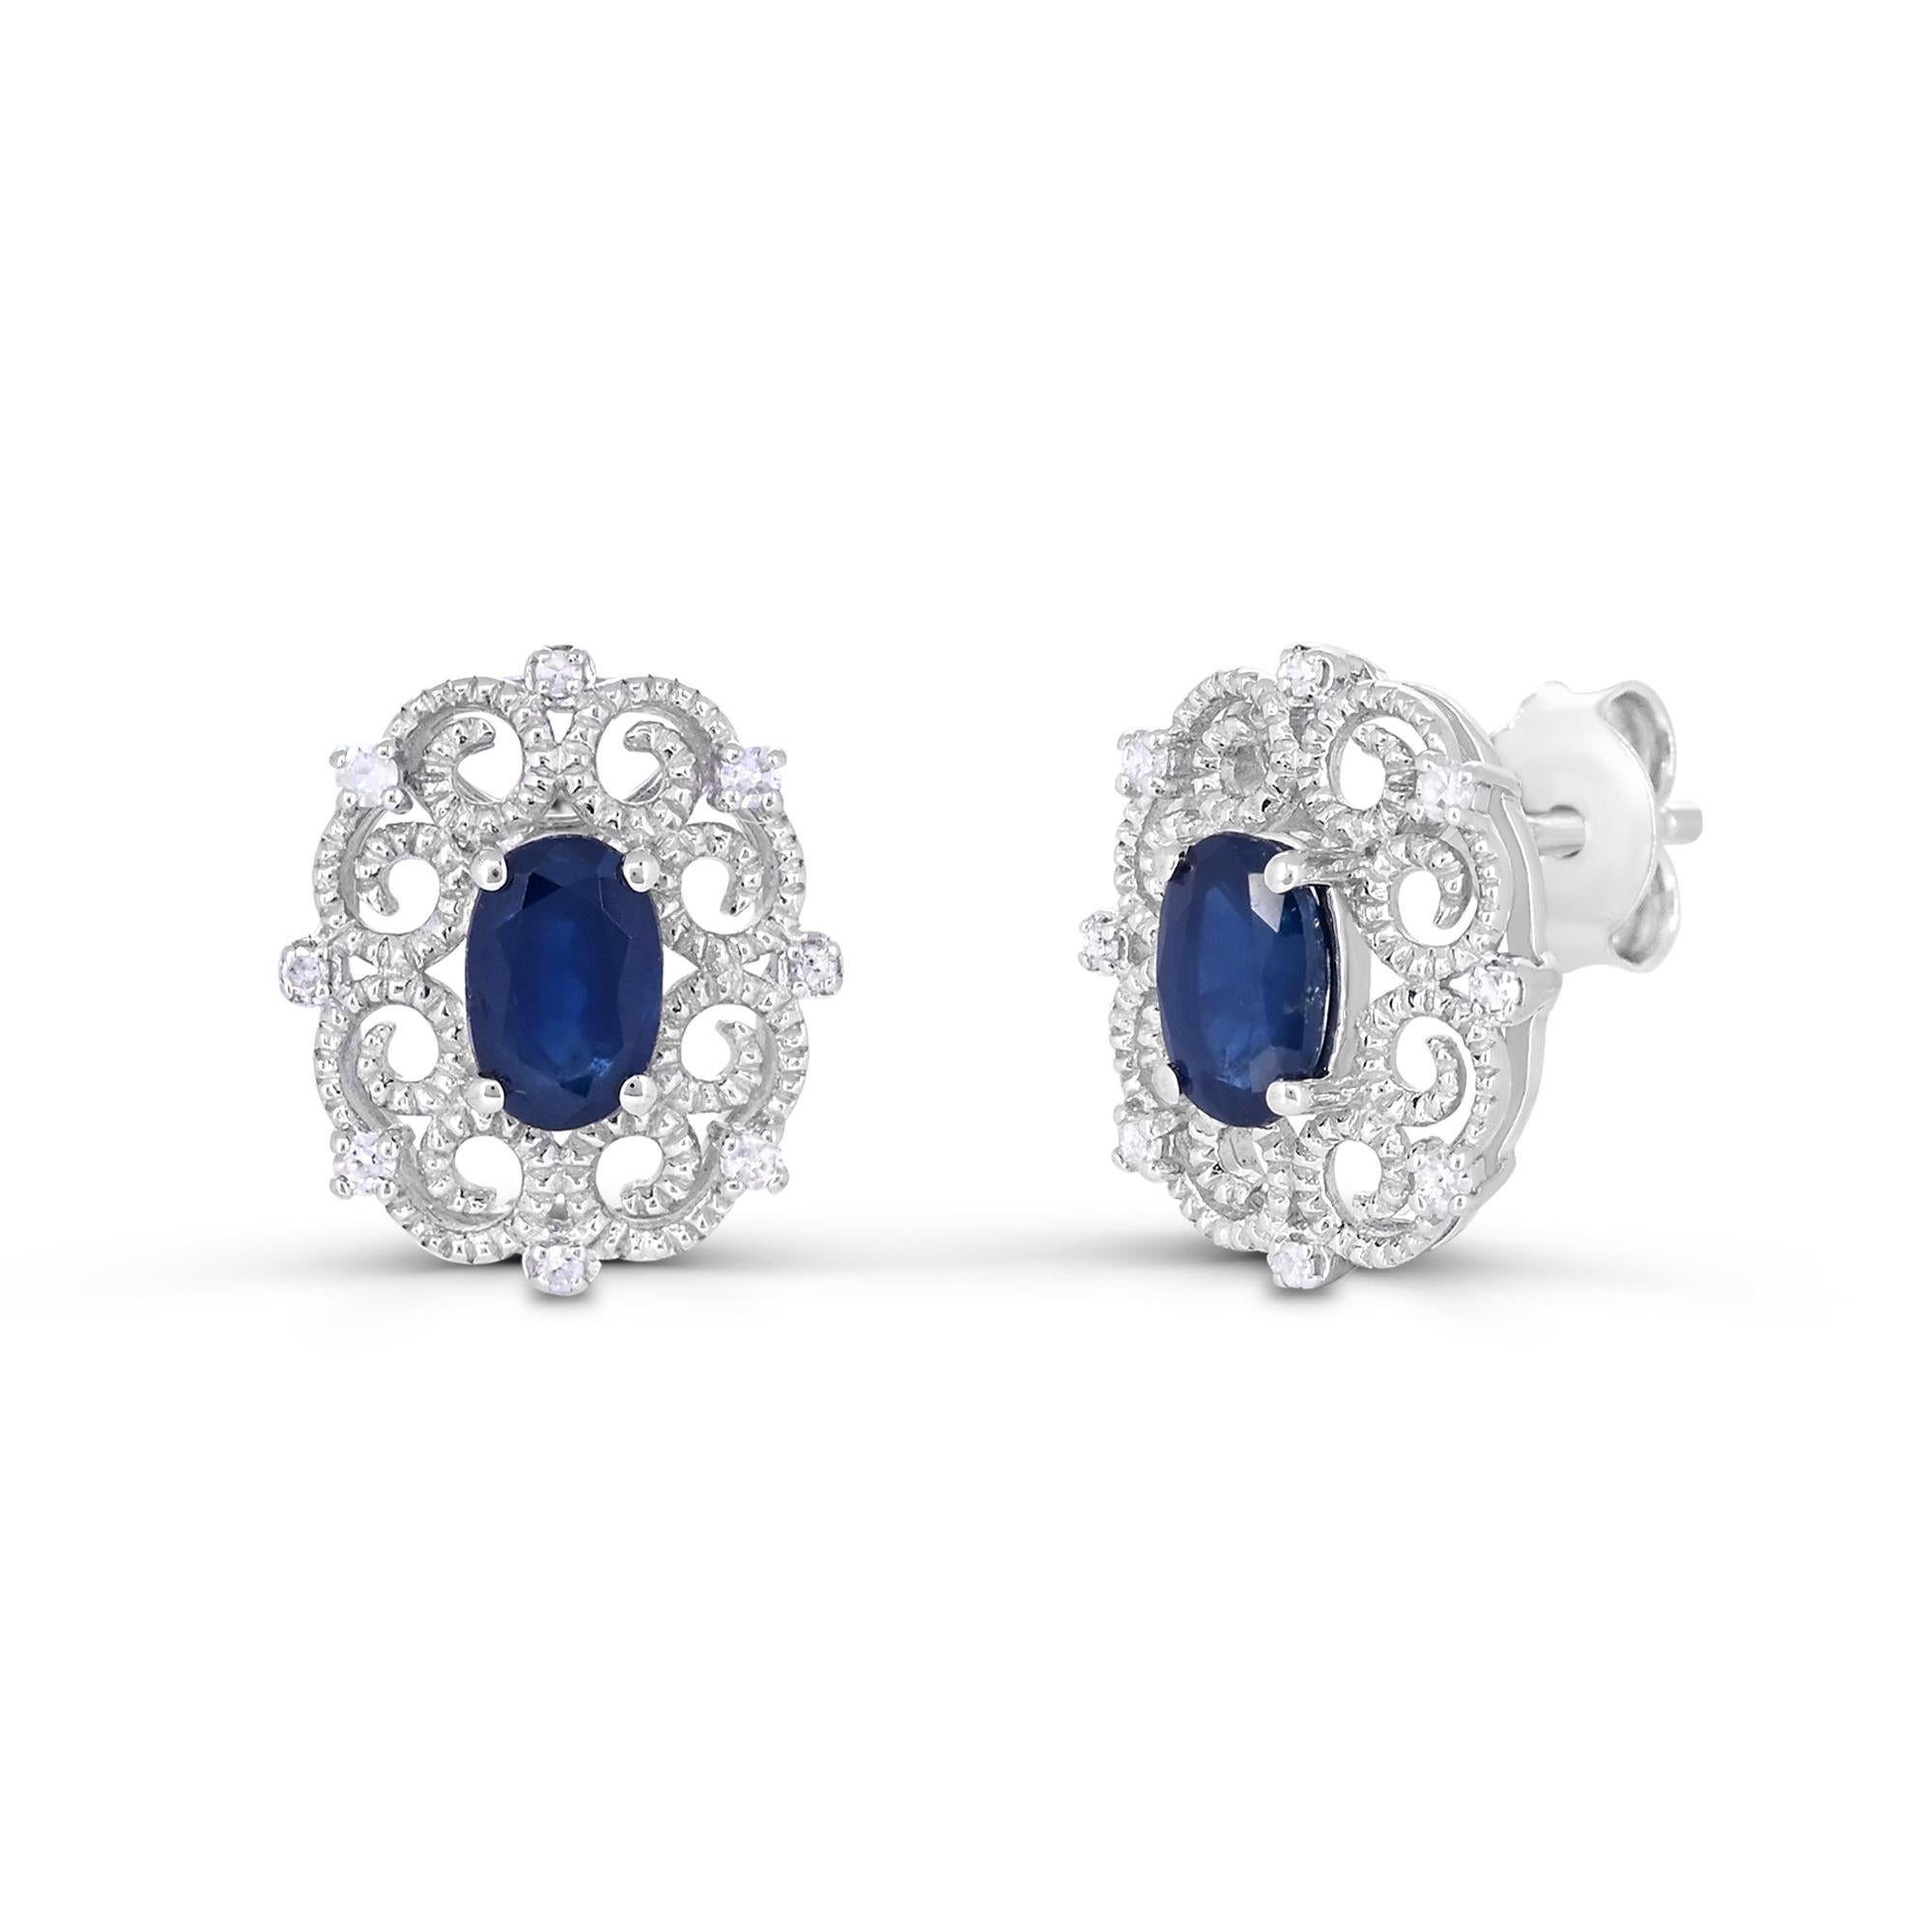 Indulge in the elegance of our Blue Sapphire and White Diamond Stud Earrings in Sterling Silver. Crafted with meticulous attention to detail, these earrings boast a stunning combination of blue sapphire and sparkling white diamonds. The sterling